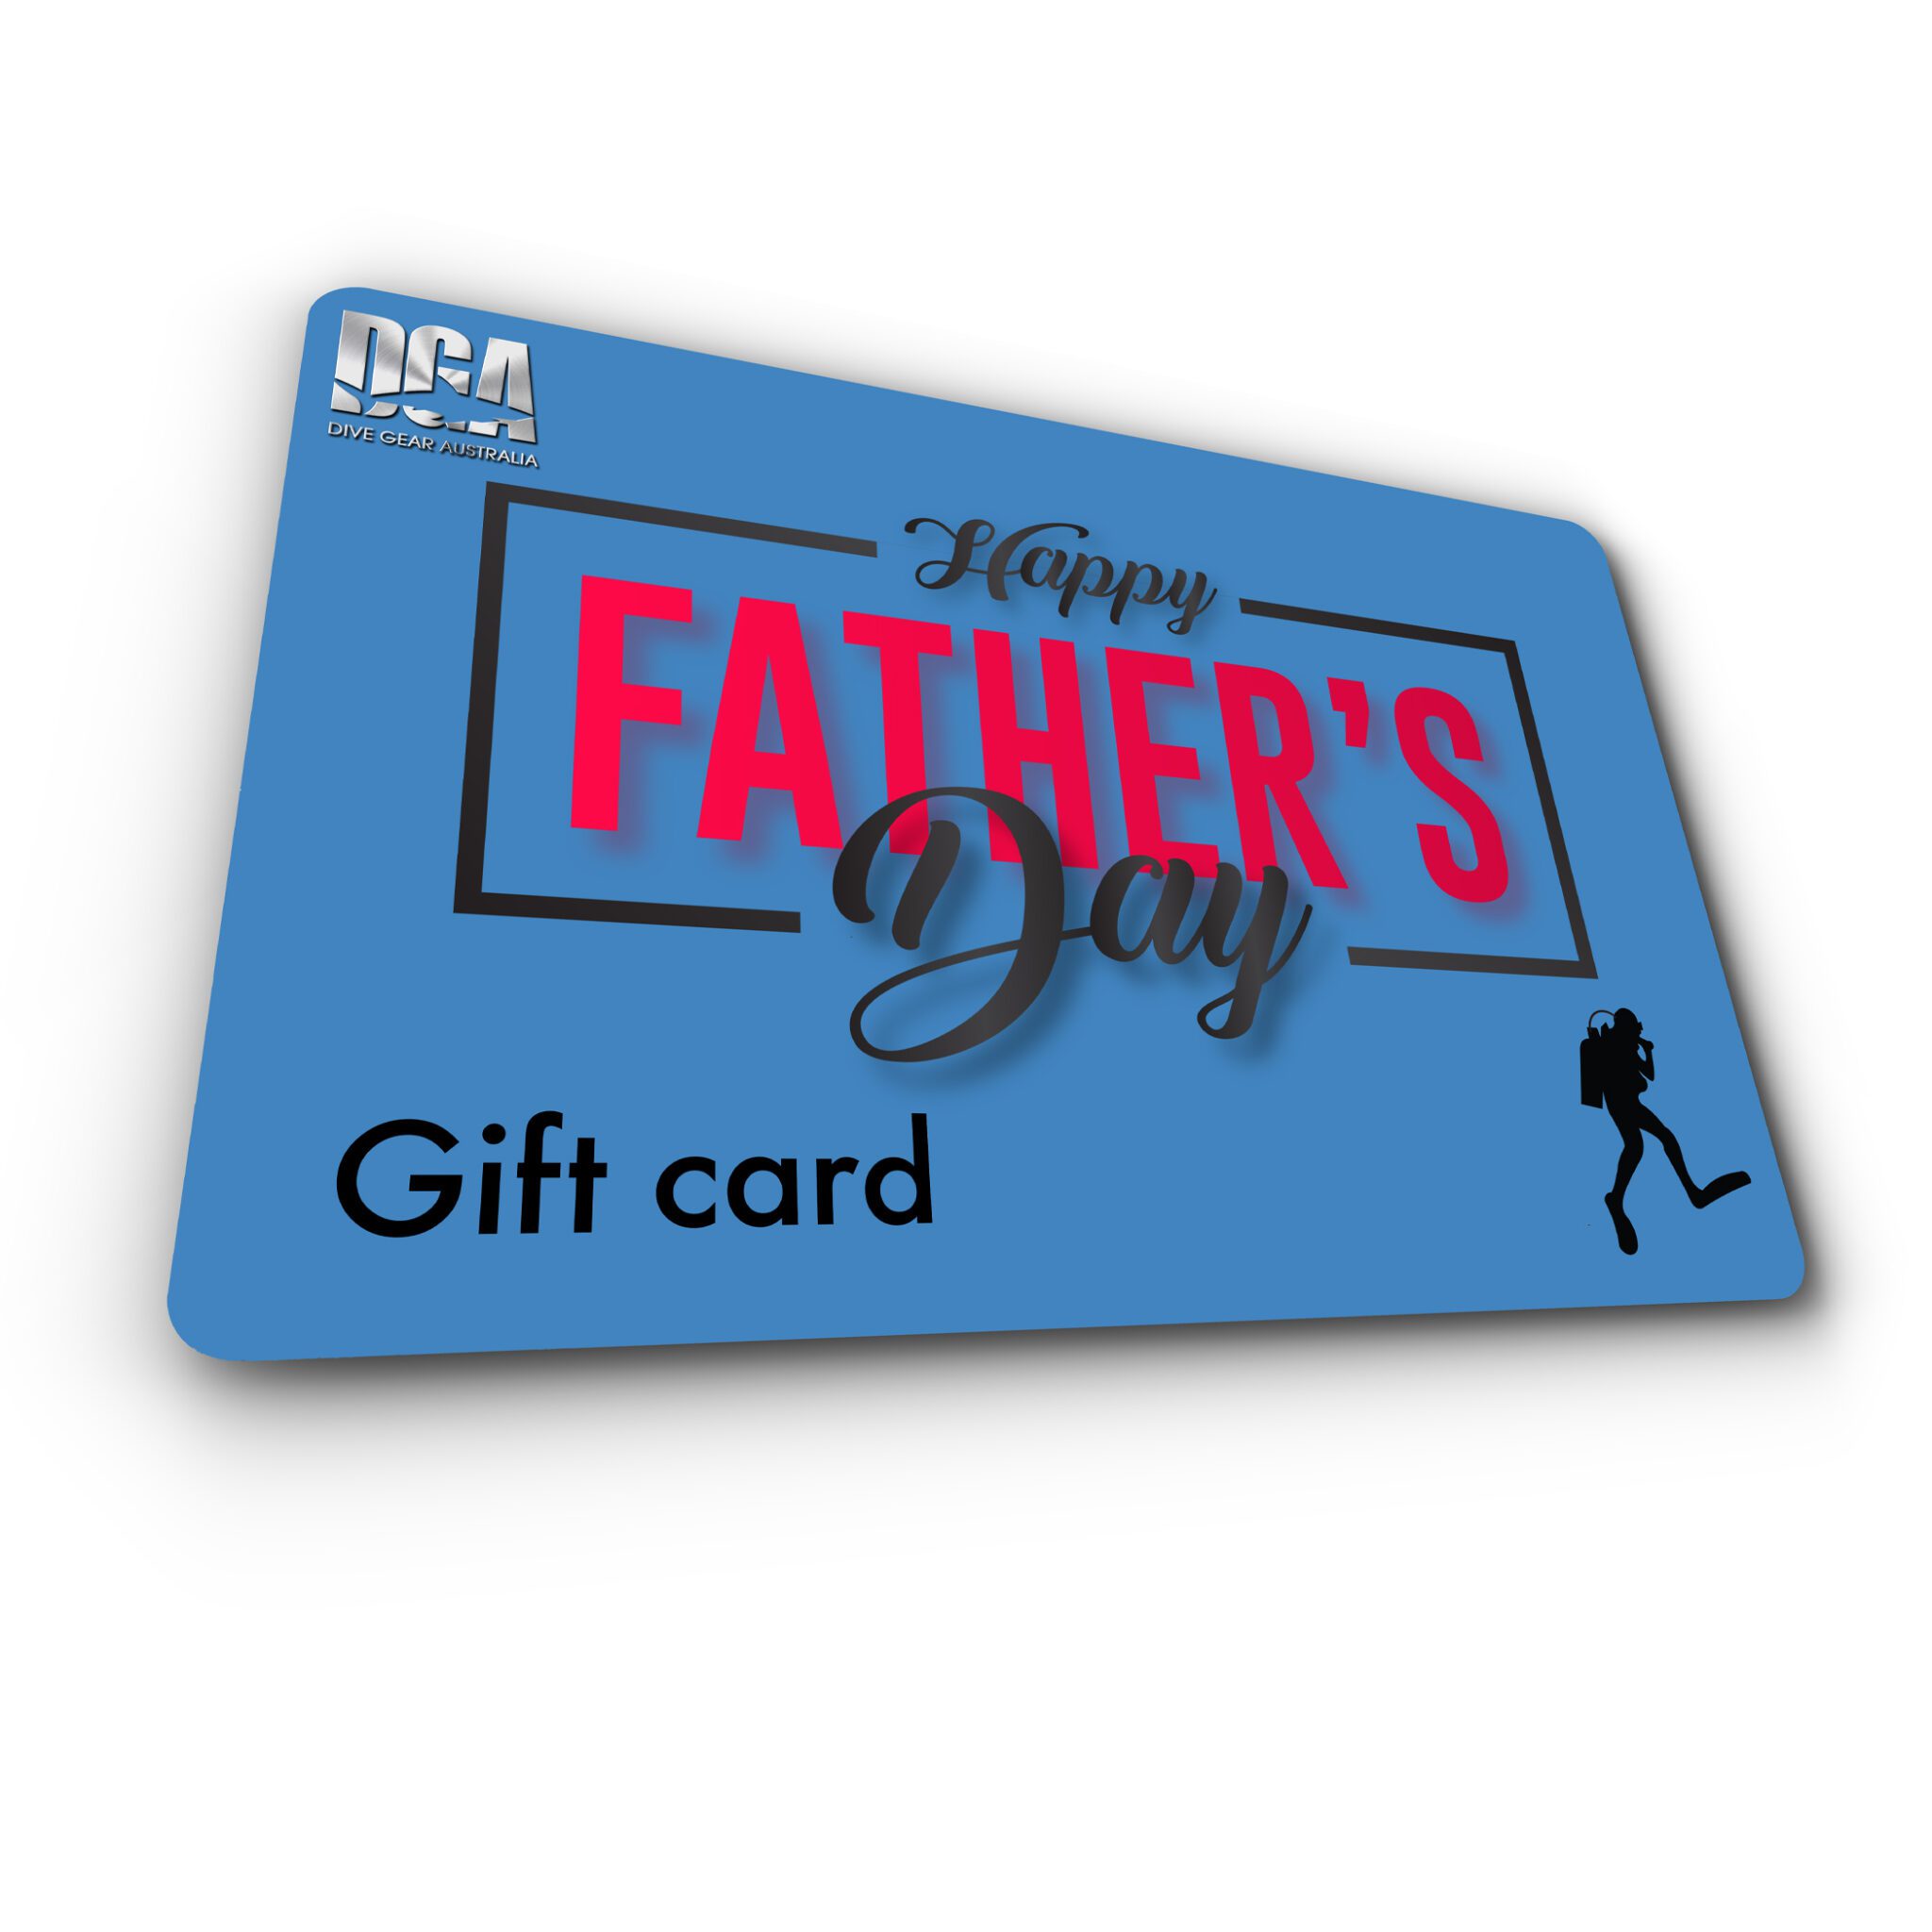 Happy Fathers Day Gift Card for scuba diving and snorkelling gear